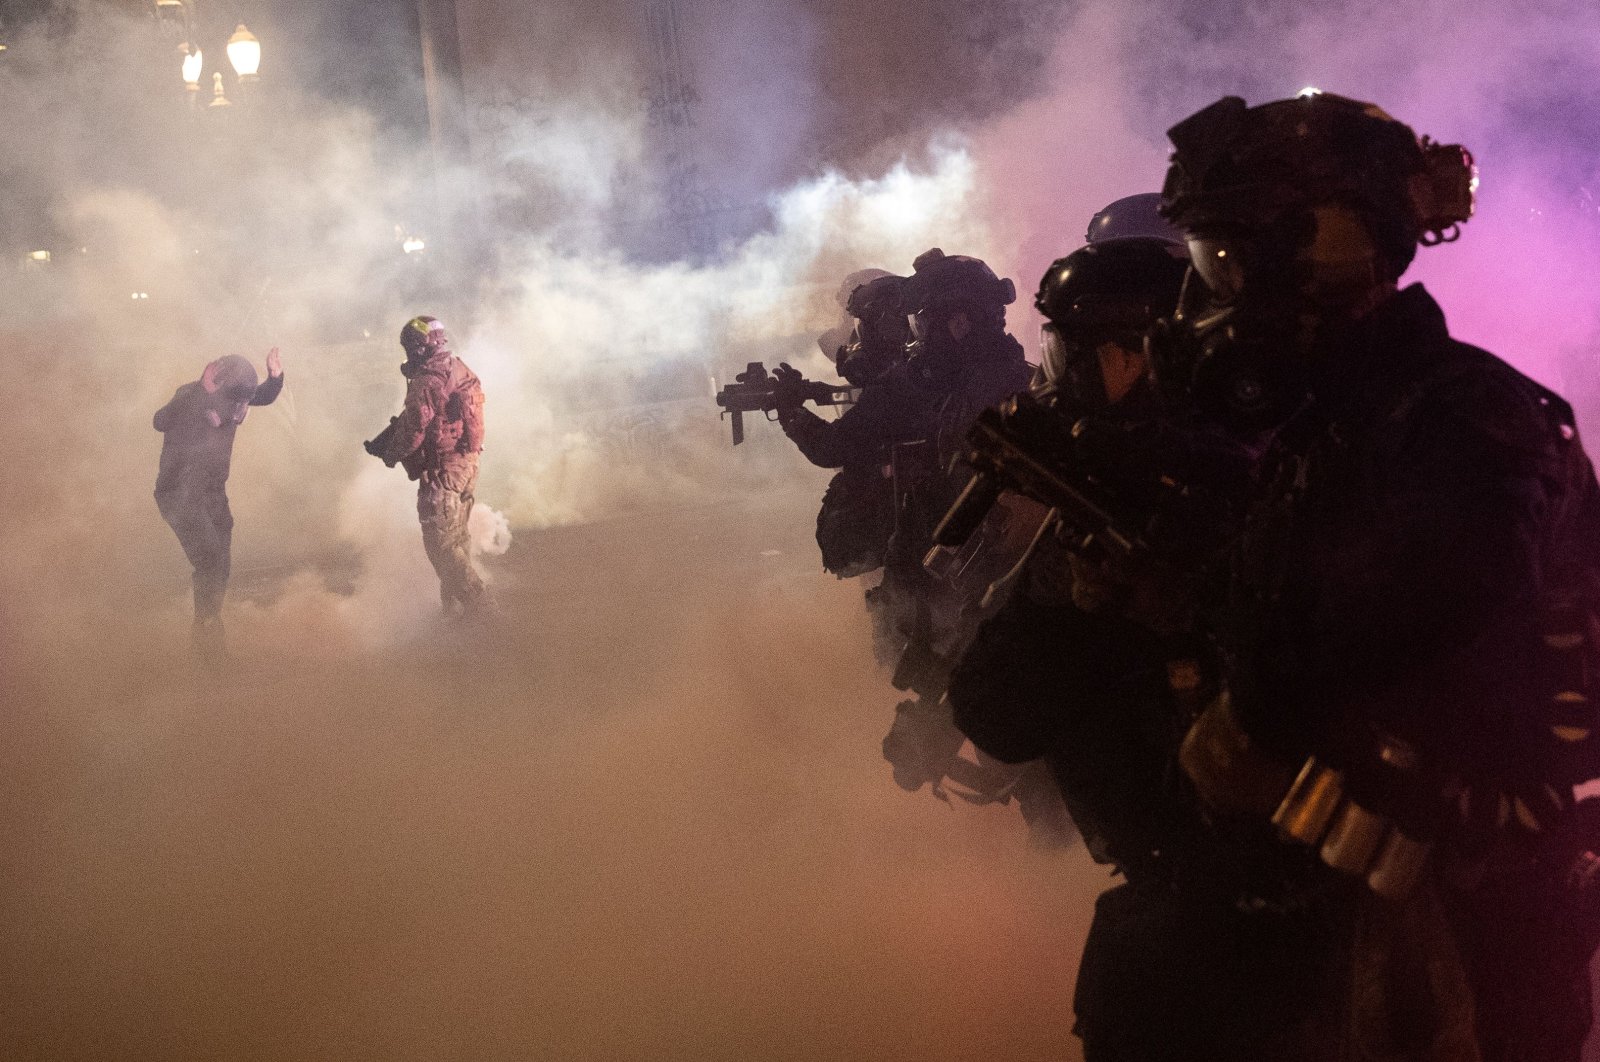 Federal law enforcement officers fire tear gas and other munitions to disperse protesters during a demonstration against police violence and racial inequality in Portland, Oregon, U.S., July 30, 2020. (Reuters Photo)